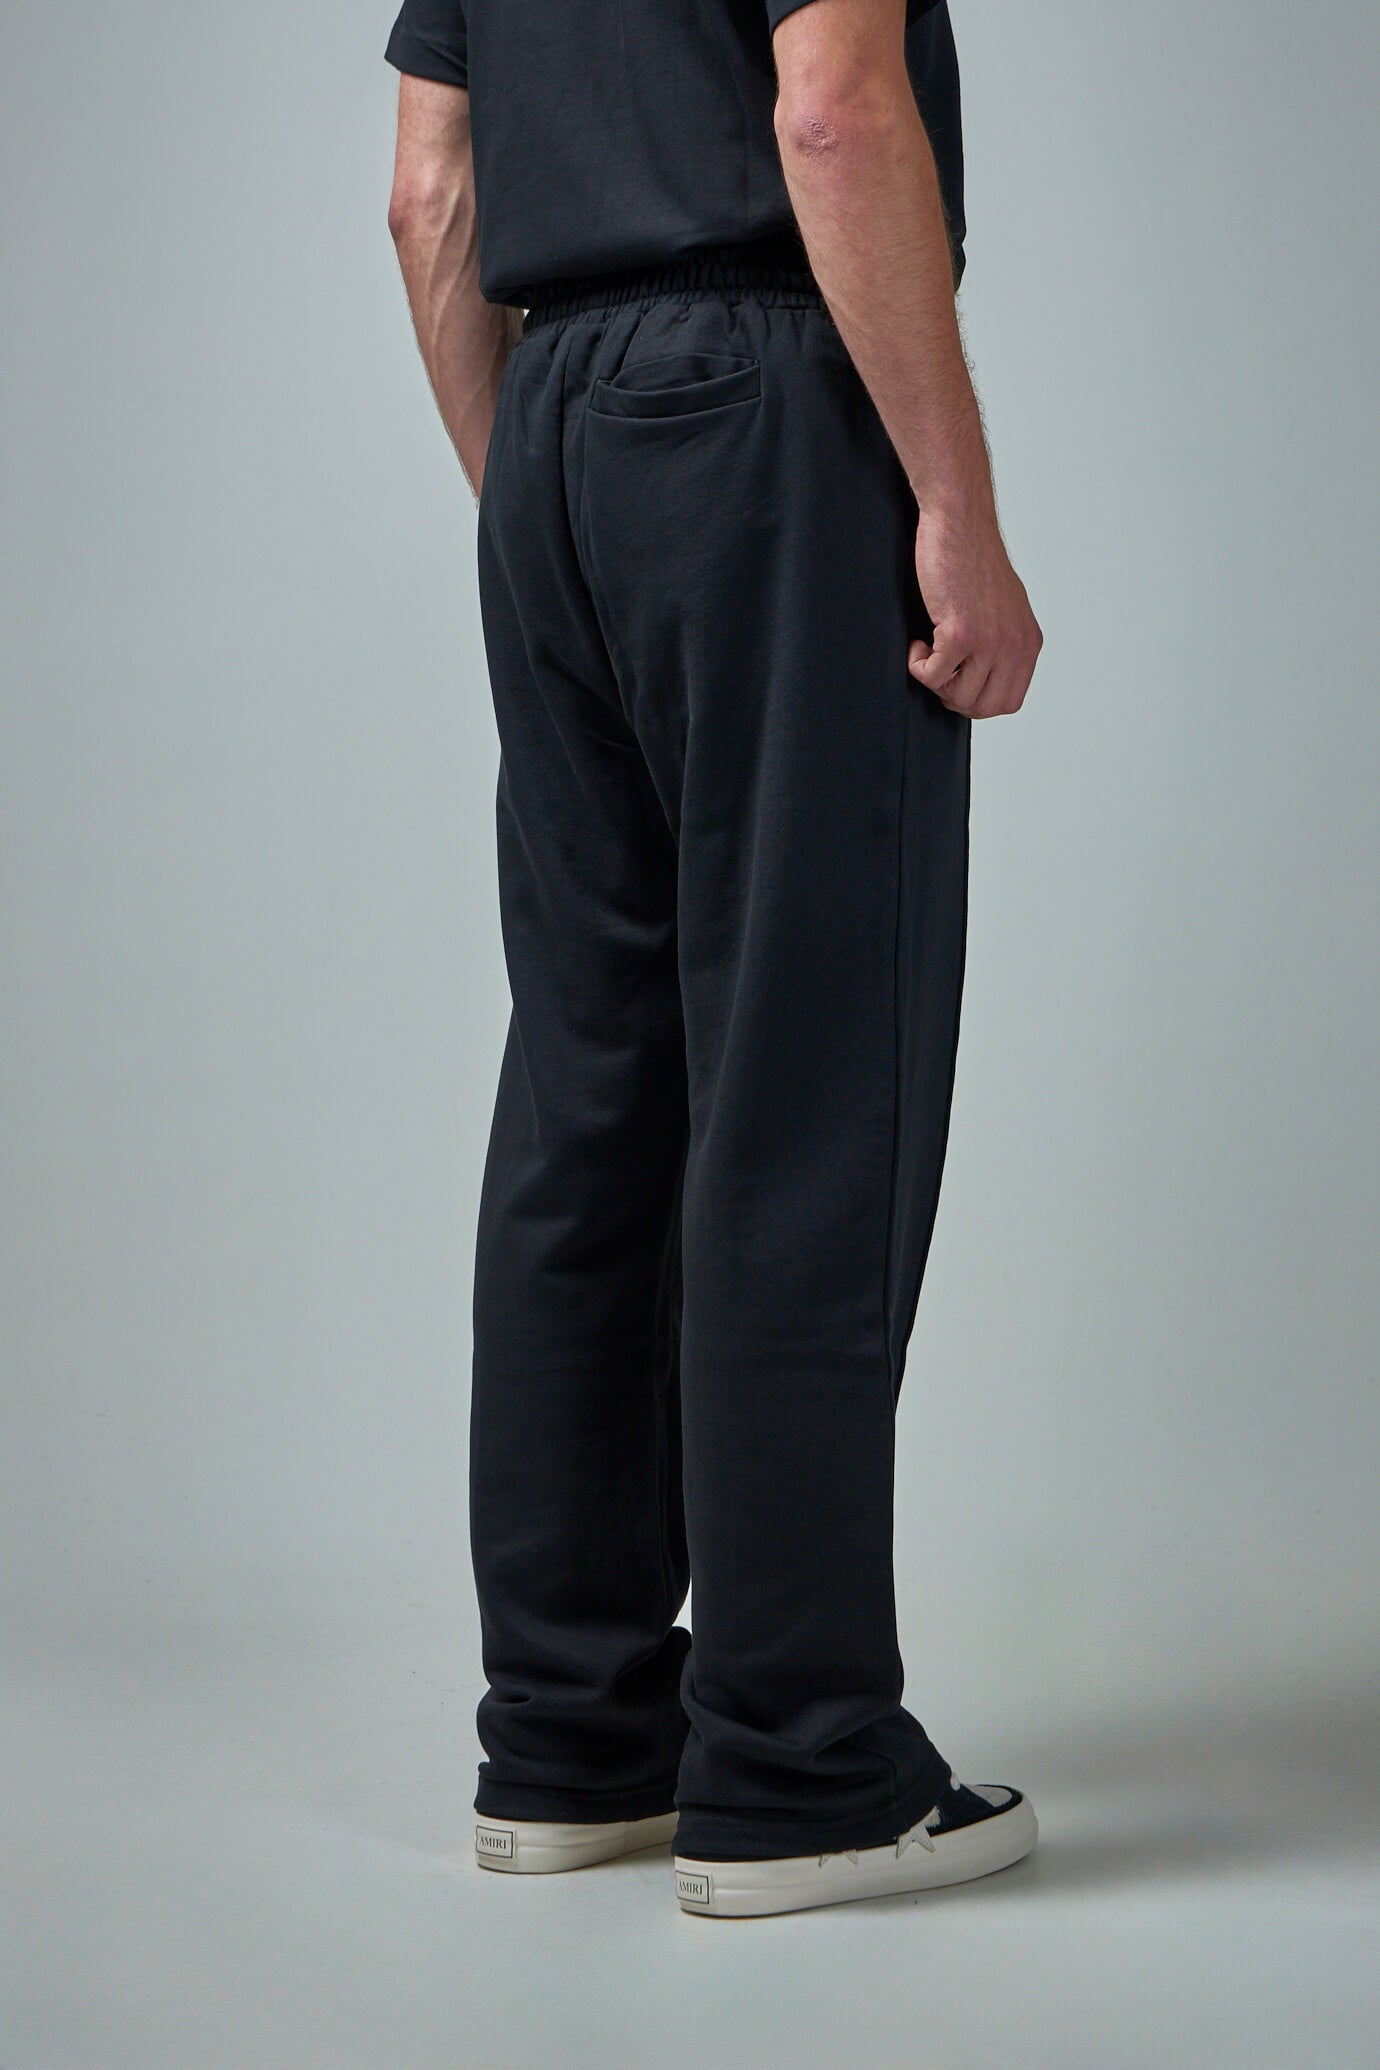 Atelier Tailored Casual Trousers